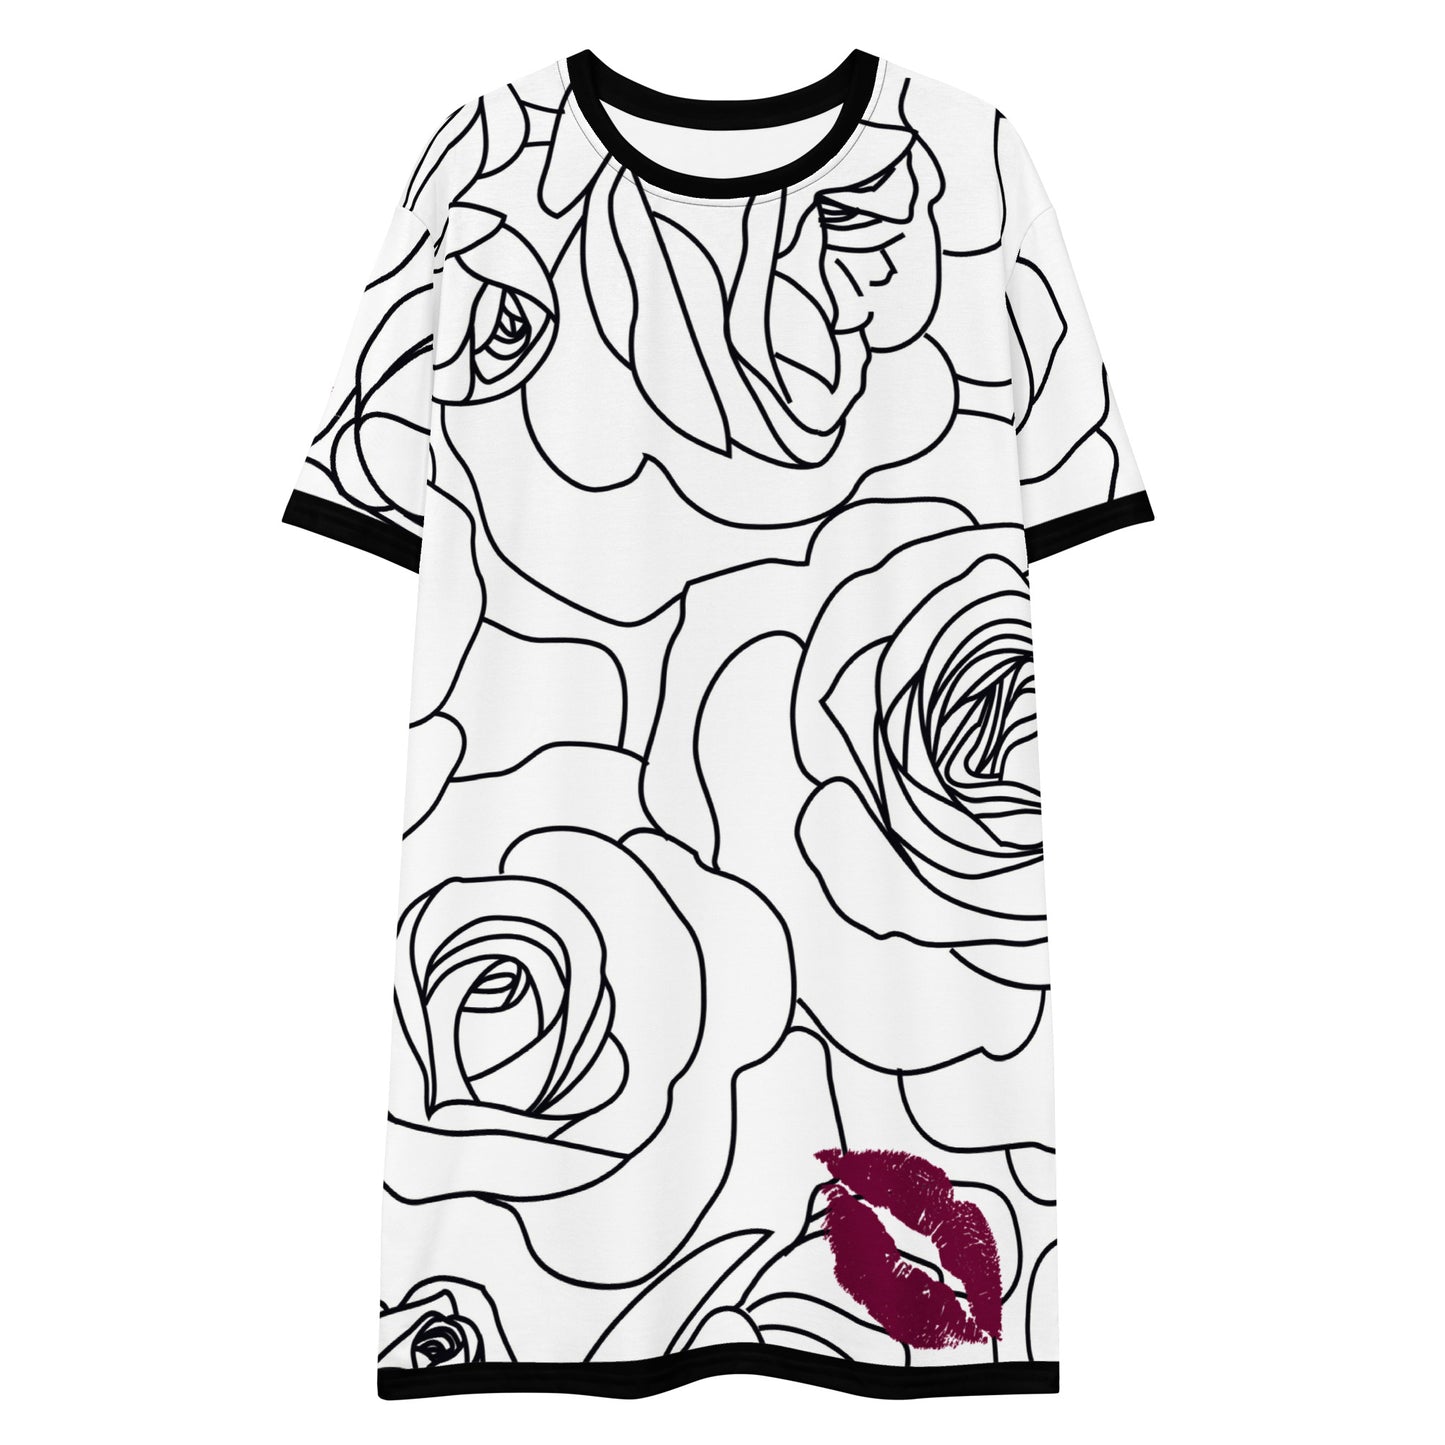 KISSED BY A ROSE T-shirt dress